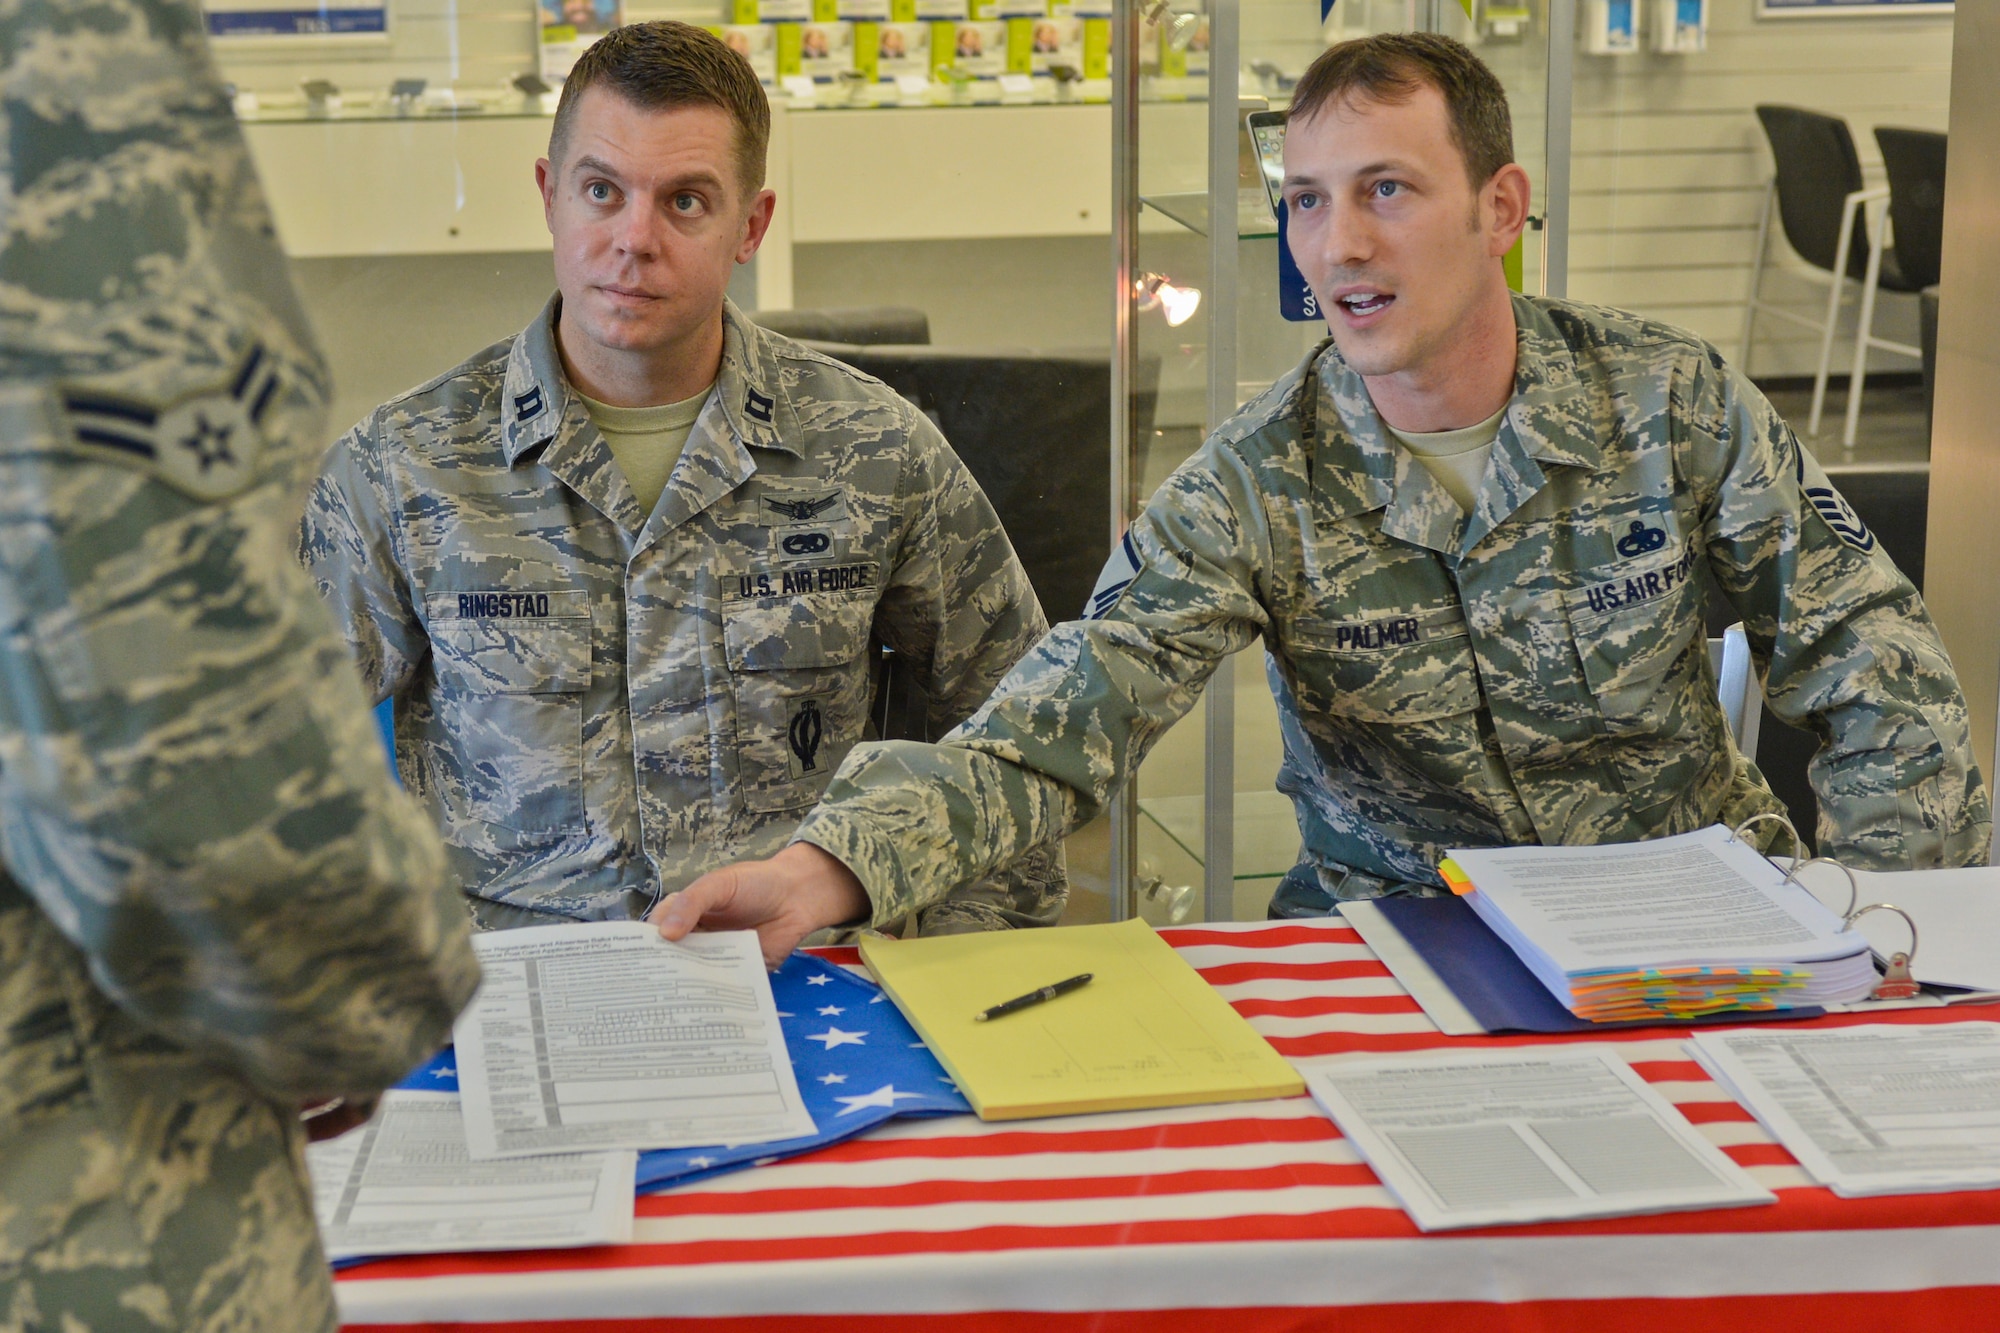 U.S. Air Force Capt. Erik Ringstad, 52nd Component Maintenance Squadron commander and Niceville, Fla., native, seated left, and U.S. Air Force Master Sgt. Timothy Palmer, 52nd CMS assistant accessory flight chief and Hobart, Ind., native, seated right, provide voter registration materials to U.S. Air Force Airman 1st Class Tyler Neff, a 52nd Security Forces Squadron patrolman and Bryson, Texas, native, at an information booth at the base exchange at Spangdahlem Air Base, Germany, June 30, 2014. The Federal Voting Assistance Program helps service members and their families with registration and voting guidelines across the United States.  (U.S. Air Force photo by Staff Sgt. Joe W. McFadden/Released)